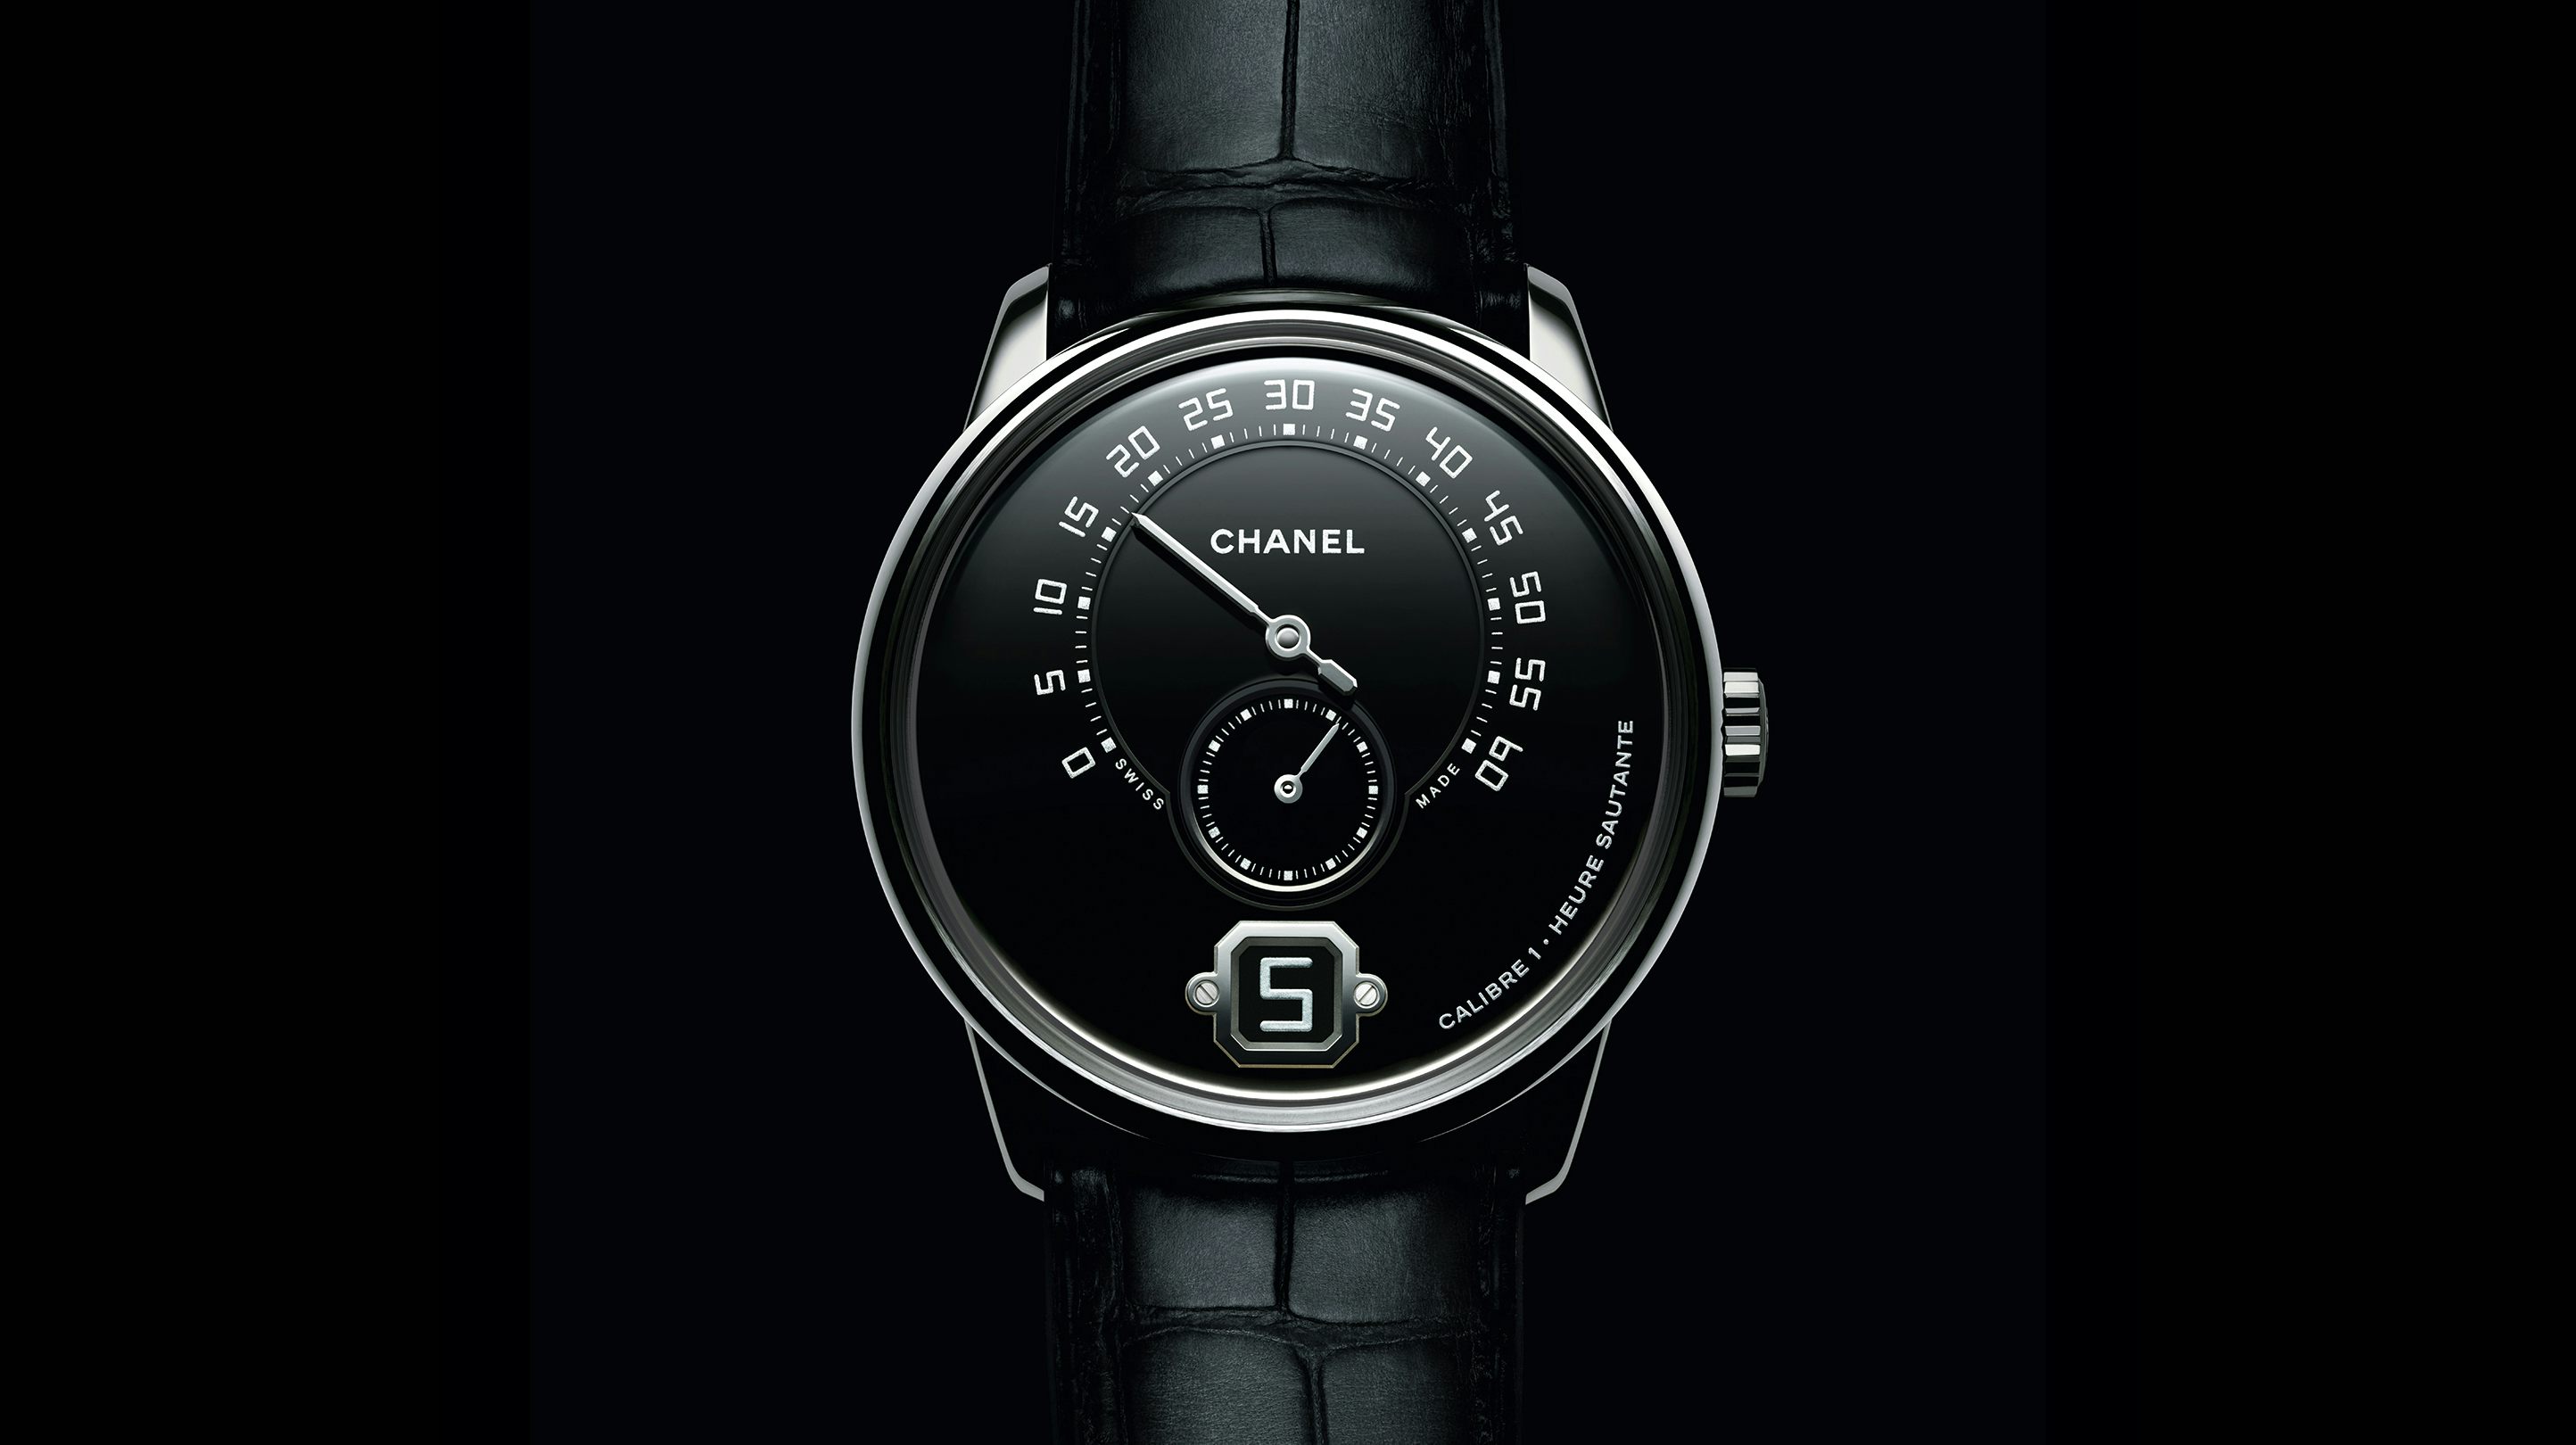 Introducing: The Monsieur de Chanel Limited Edition In Platinum